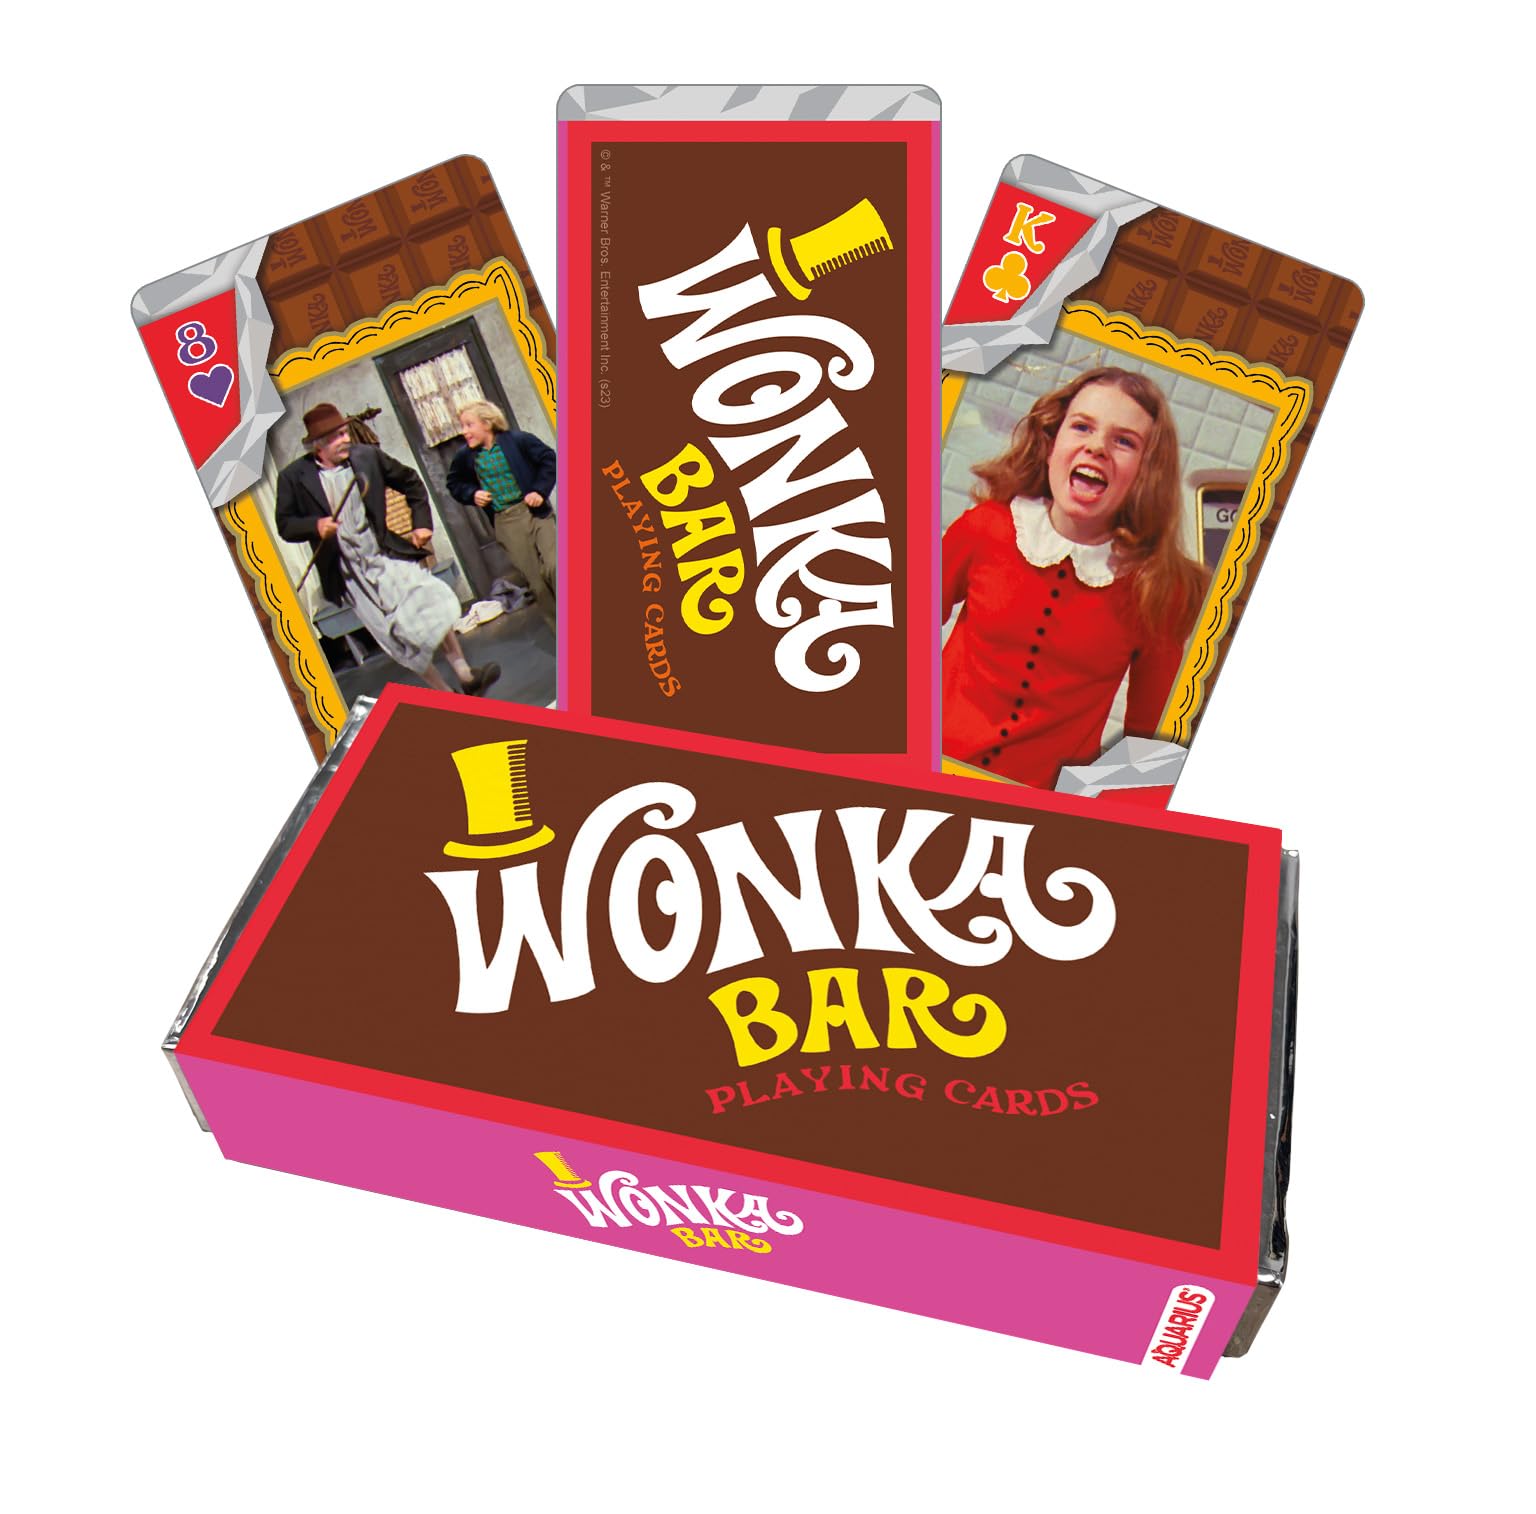 AQUARIUS Willy Wonka Chocolate Bar Premium Playing Cards – Willy Wonka Themed Deck of Cards for Your Favorite Card Games - Officially Licensed Willy Wonka Merchandise & Collectibles